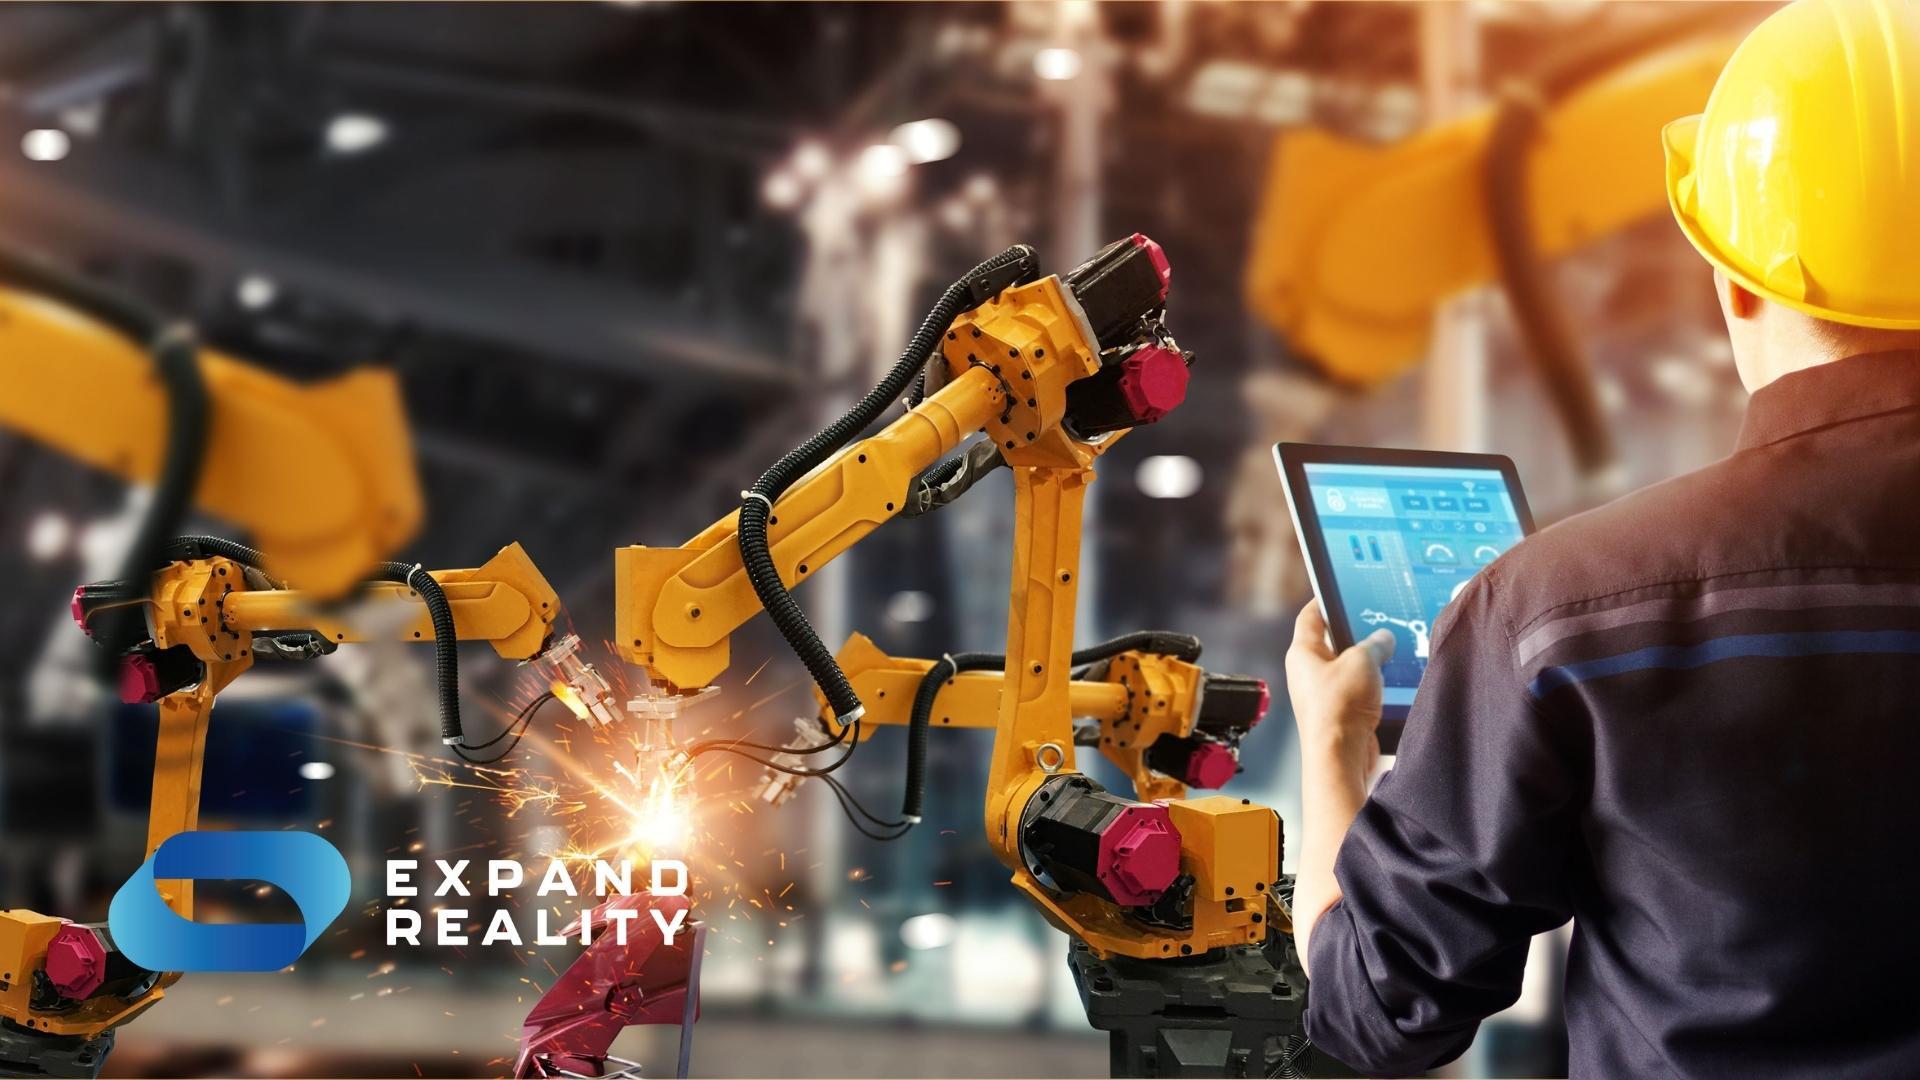 Learn how extended reality (XR) devices can boost productivity, improve safety and cut costs in manufacturing. See key use cases in our industry guide.